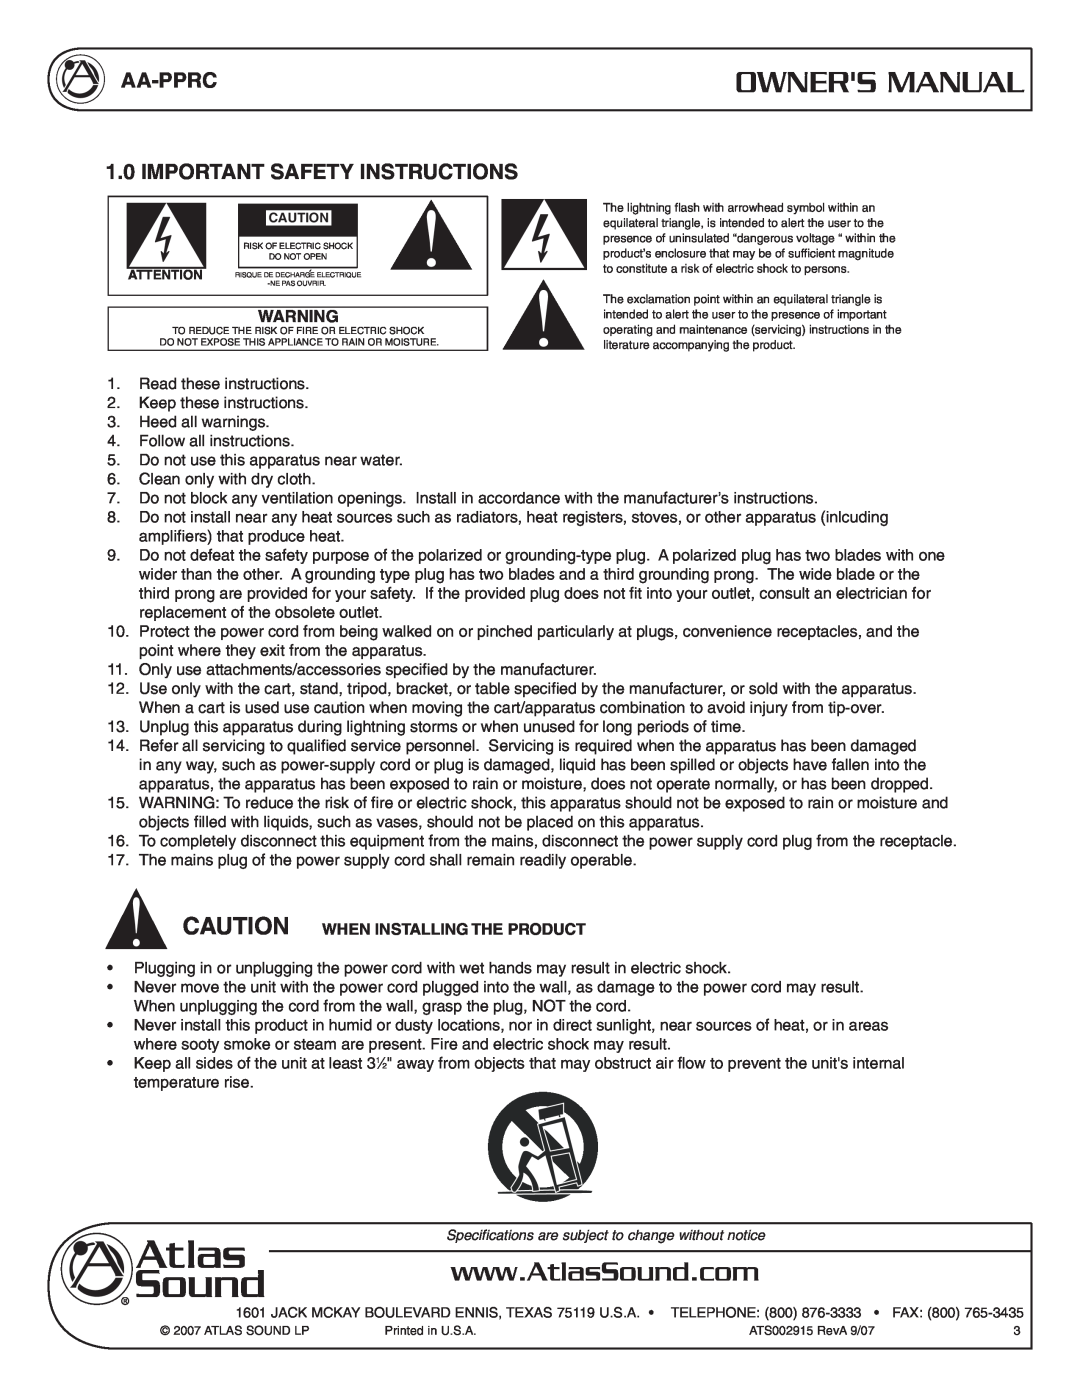 Atlas Sound owner manual Owners Manual, AA-PPRC 1.0 IMPORTANT SAFETY INSTRUCTIONS, Caution When Installing The Product 